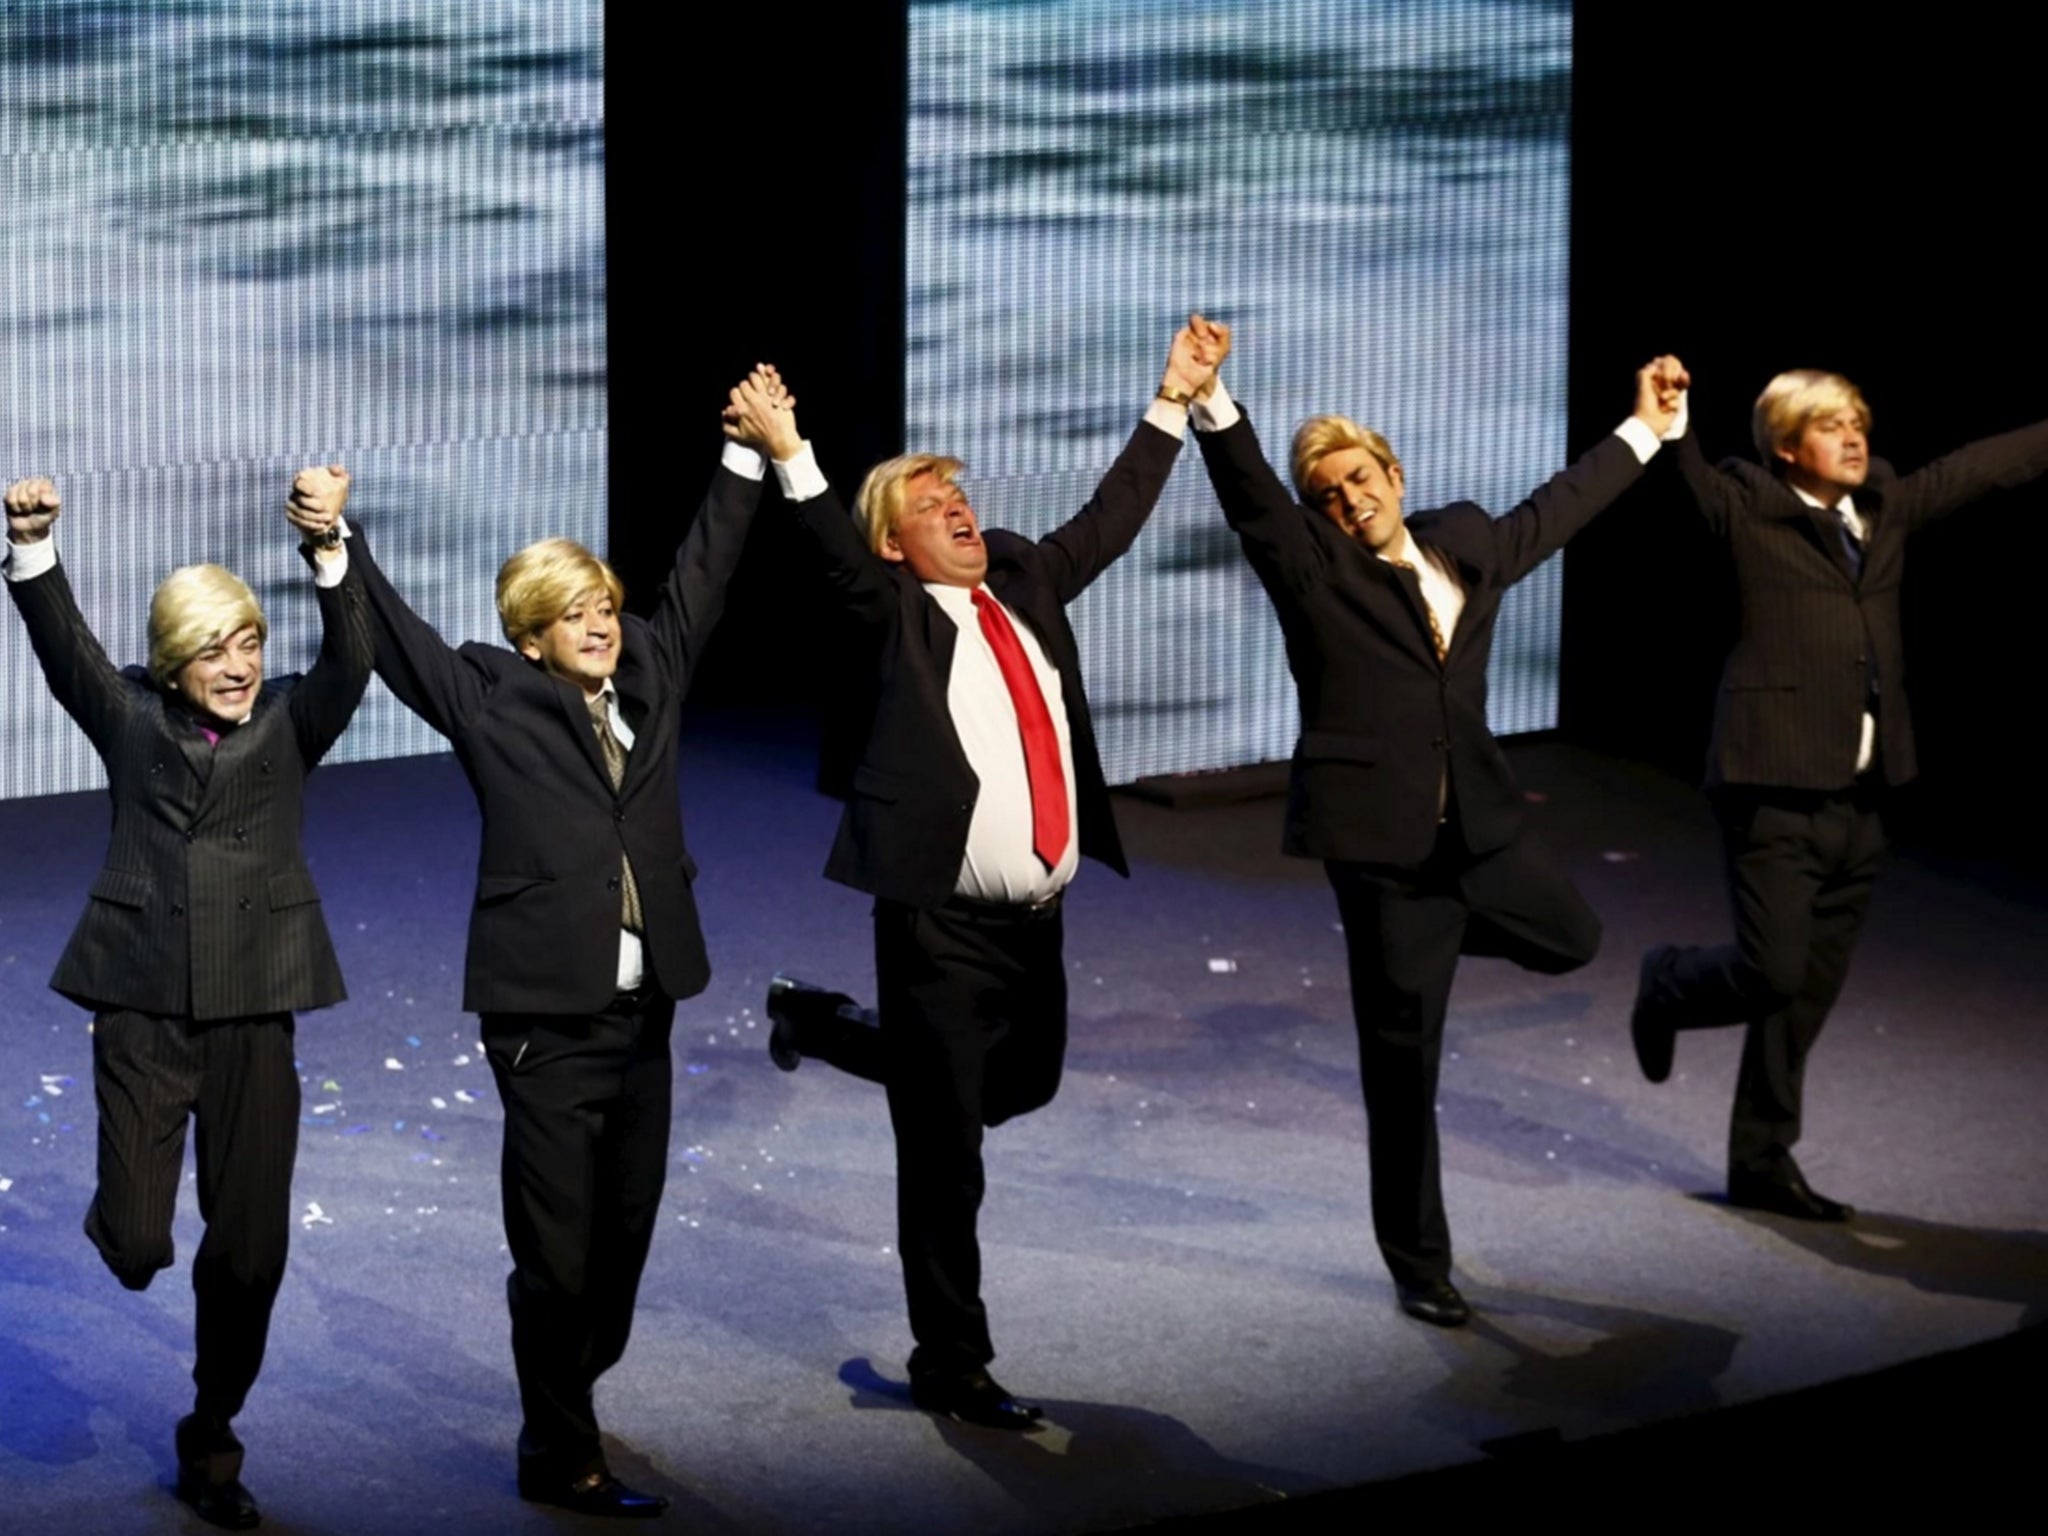 Mexican comics, one of them dressed as U.S. Republican presidential candidate Donald Trump poke fun at the candidate during a show entitled "Sons of Trump" at the Aldana theater in Mexico City